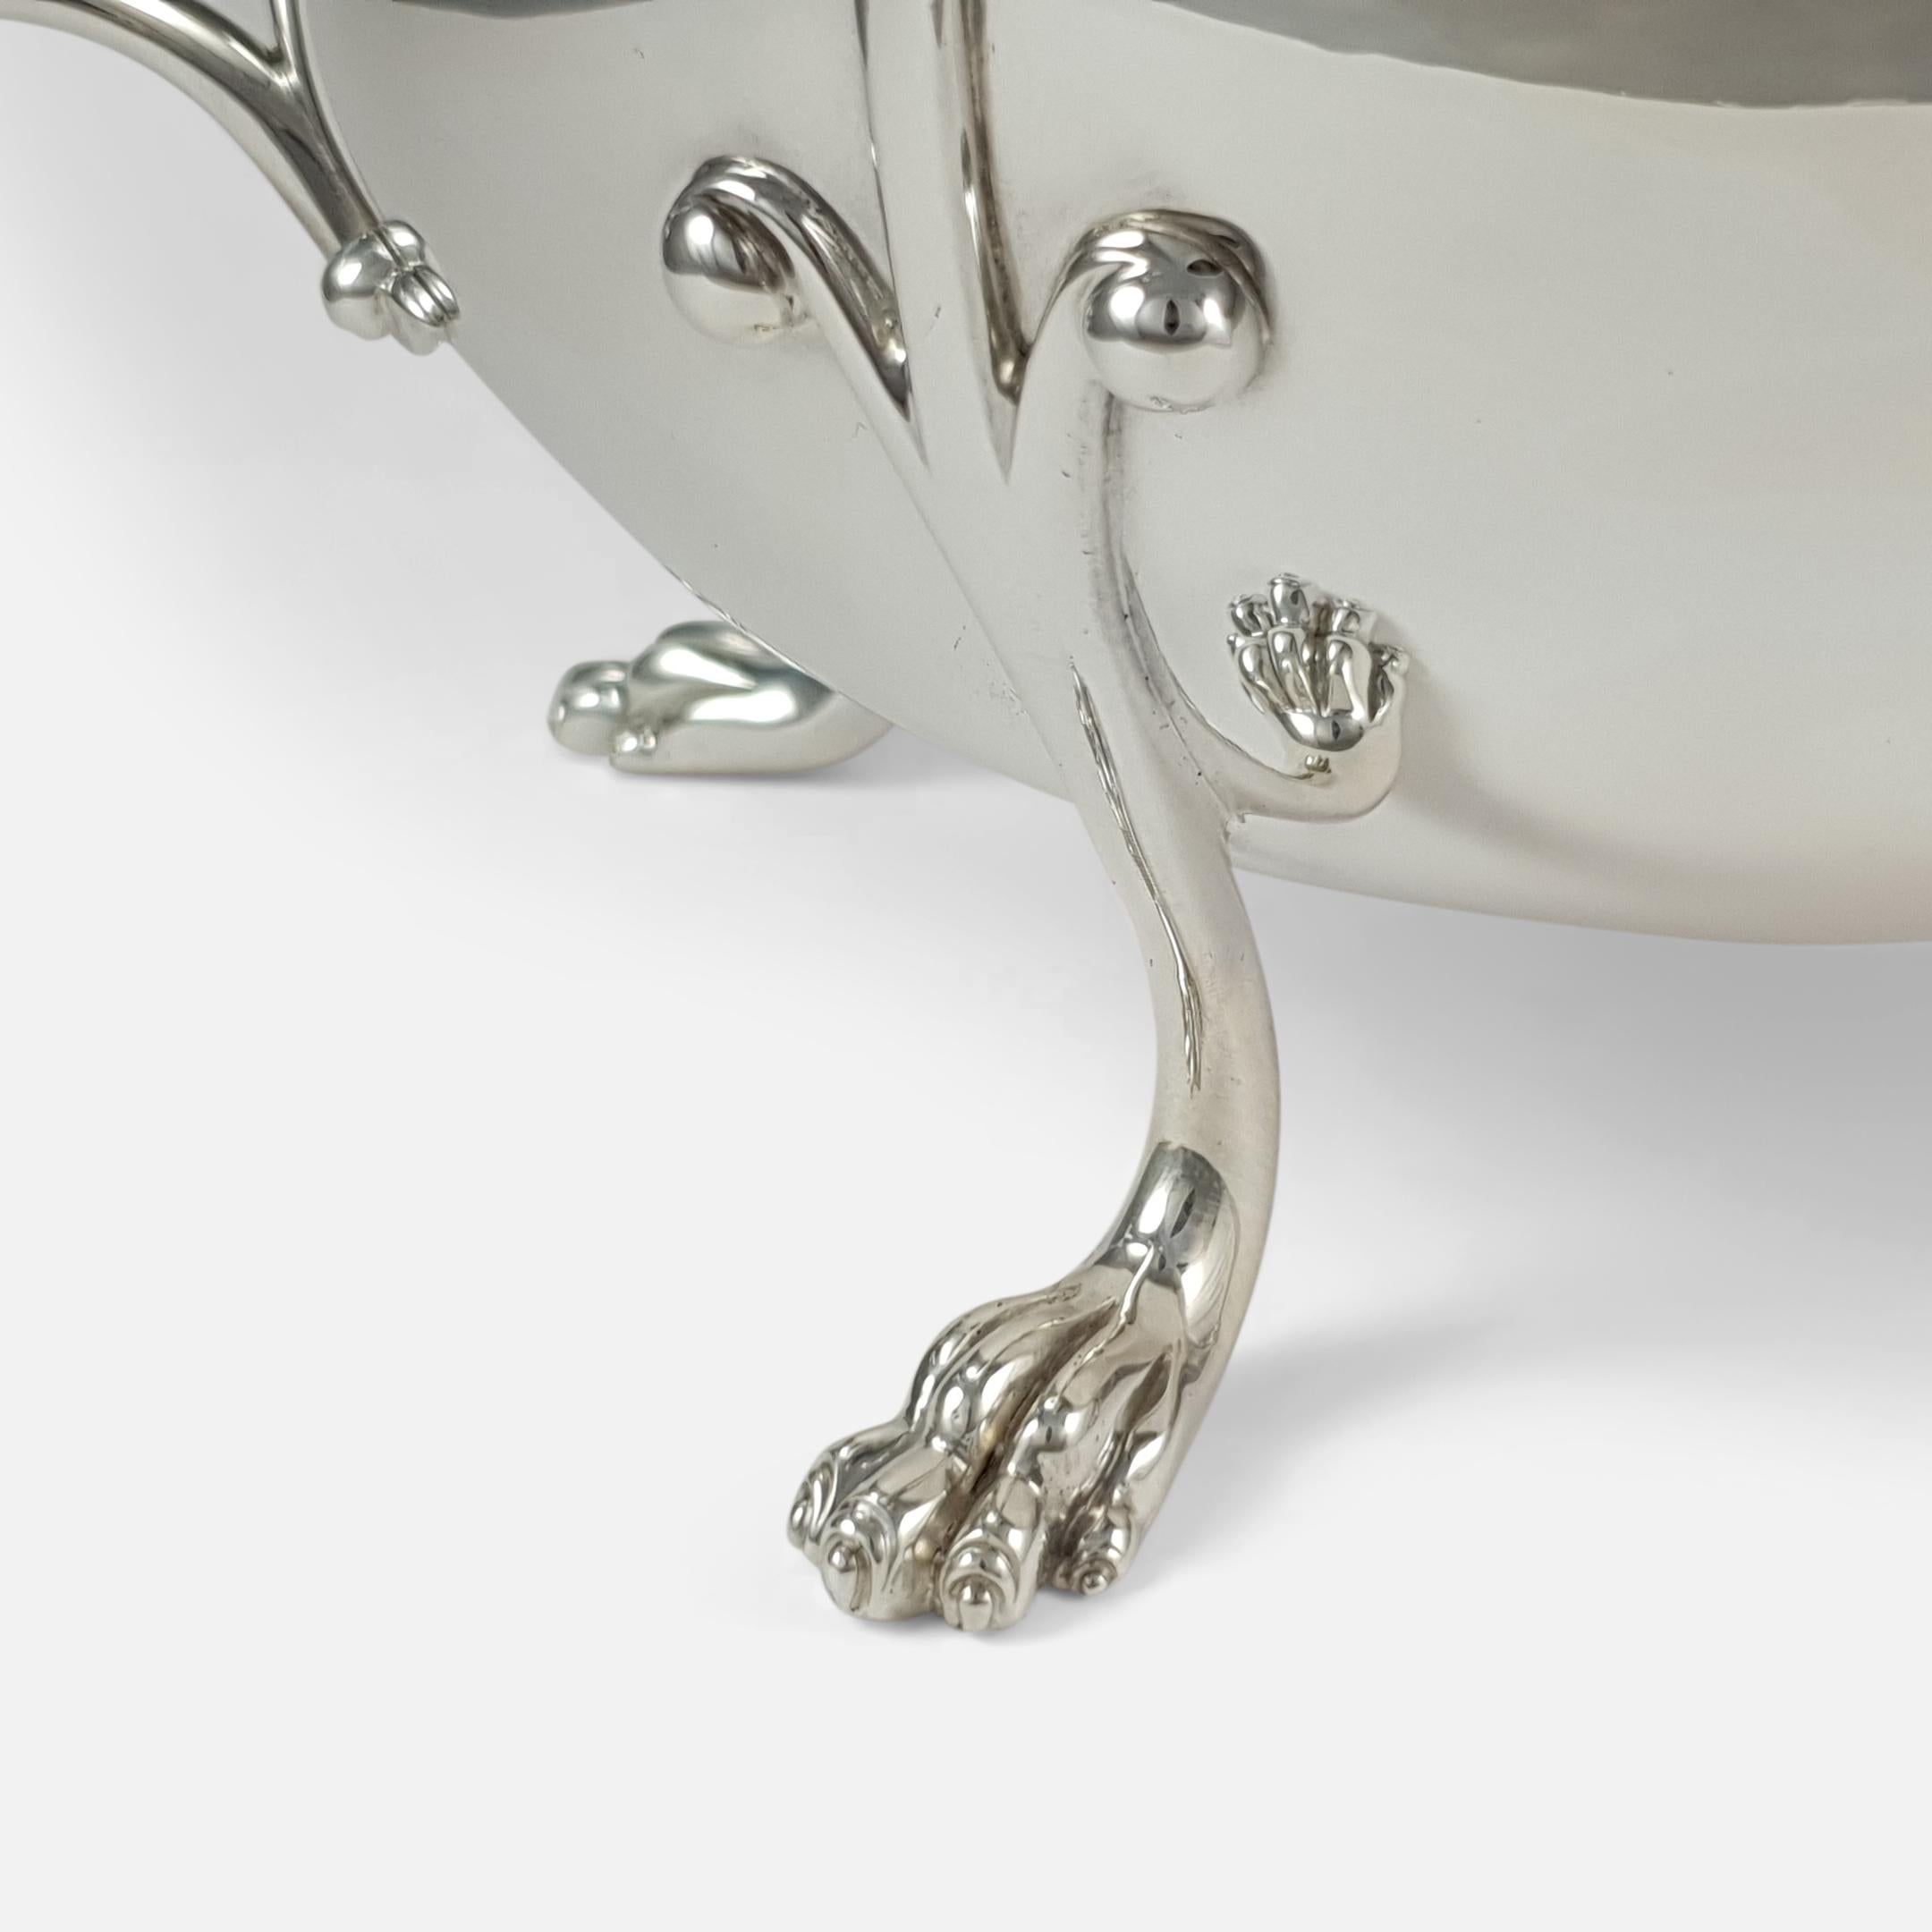 Edwardian Silver Twin-Handled Jardinière Bowl, Wakely and Wheeler, 1905 For Sale 4